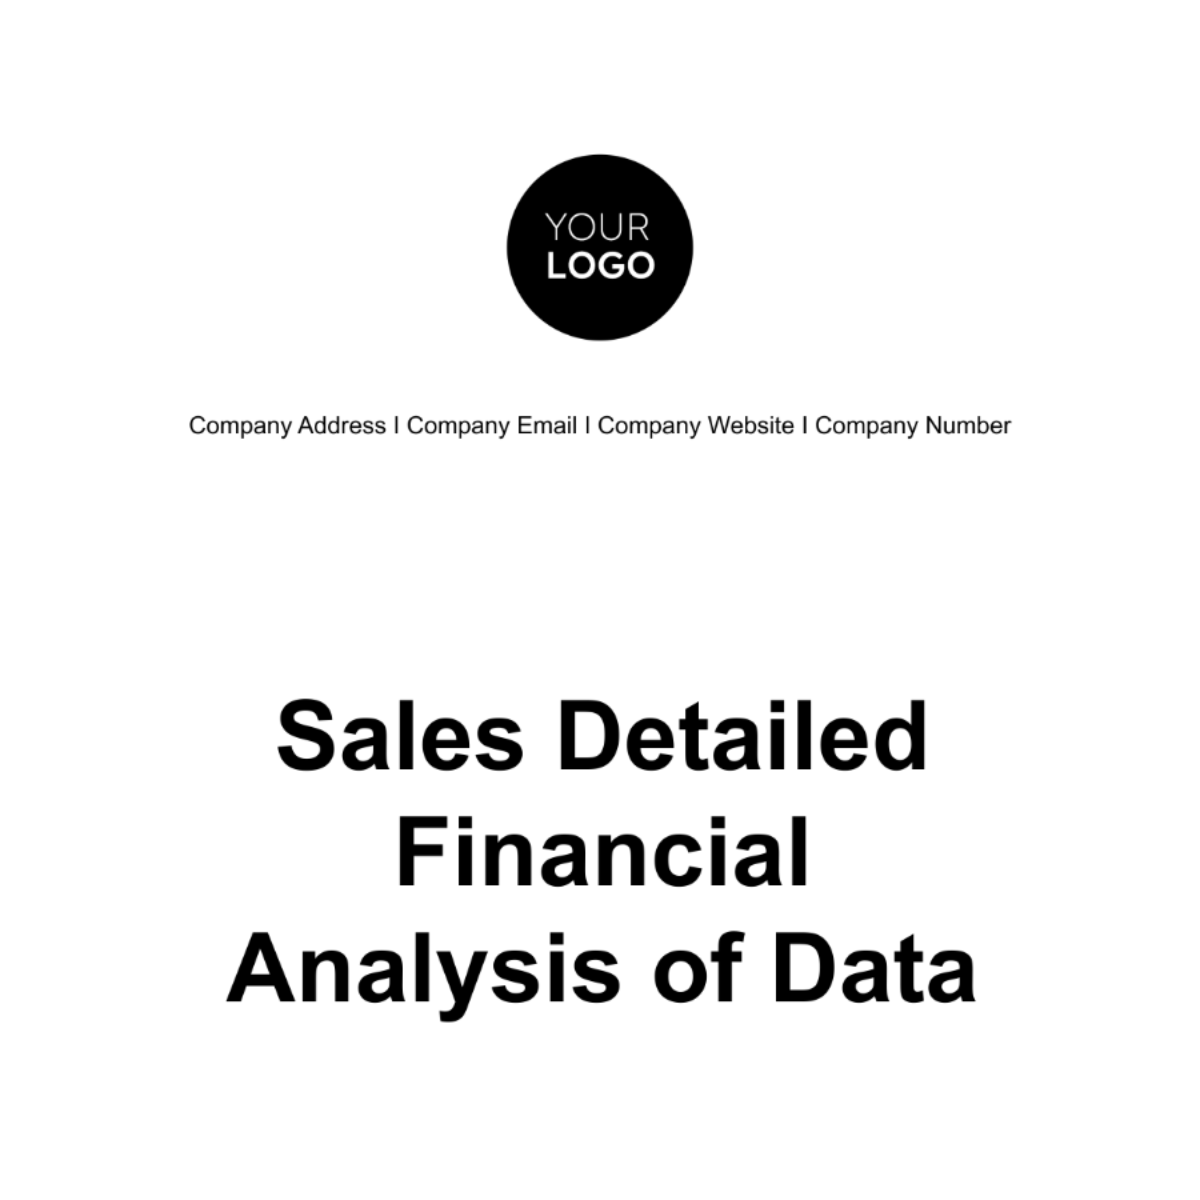 Sales Detailed Financial Analysis of Data Template